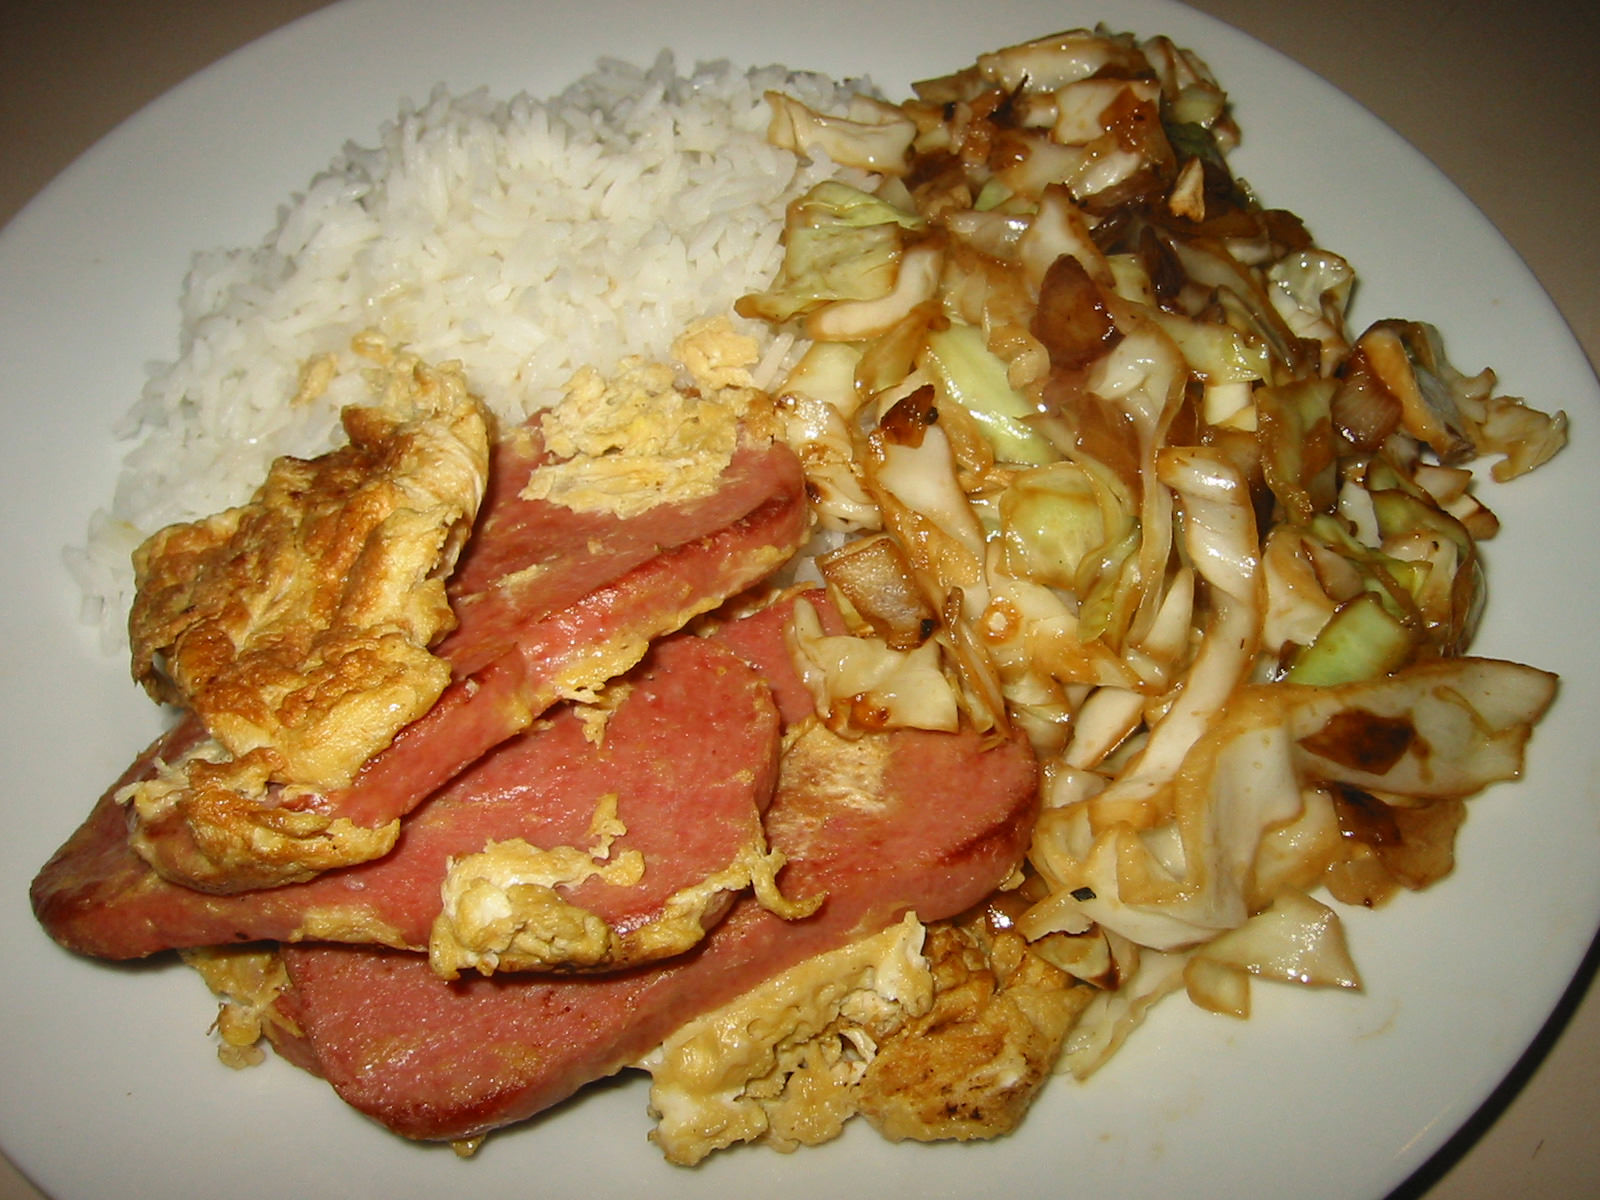 Fried SPAM and egg, cabbage and rice